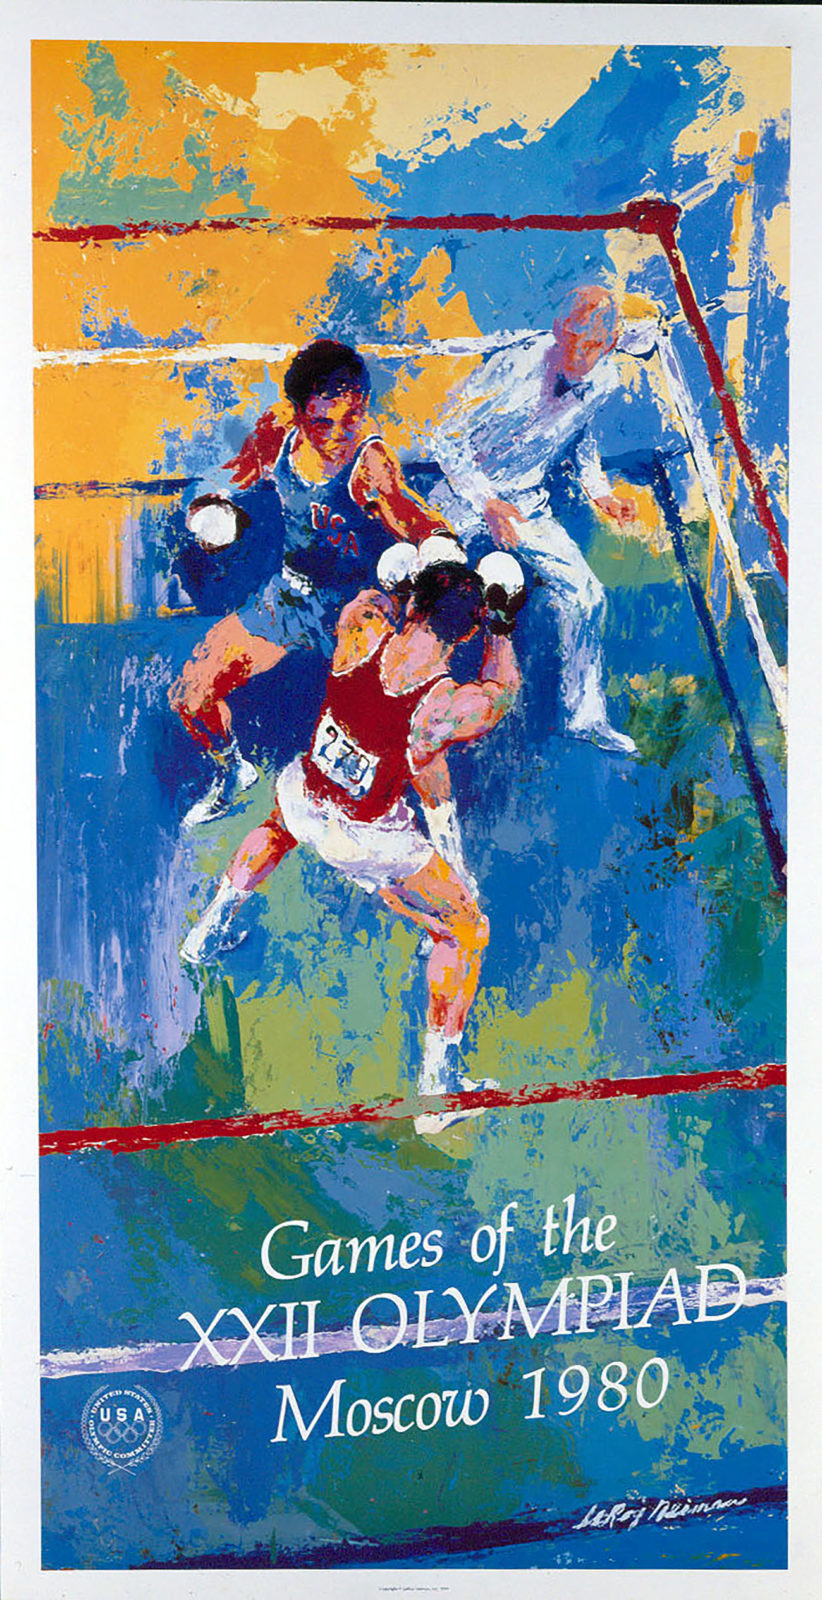 Games od the XXII Olympiad Moscow 1980 poster